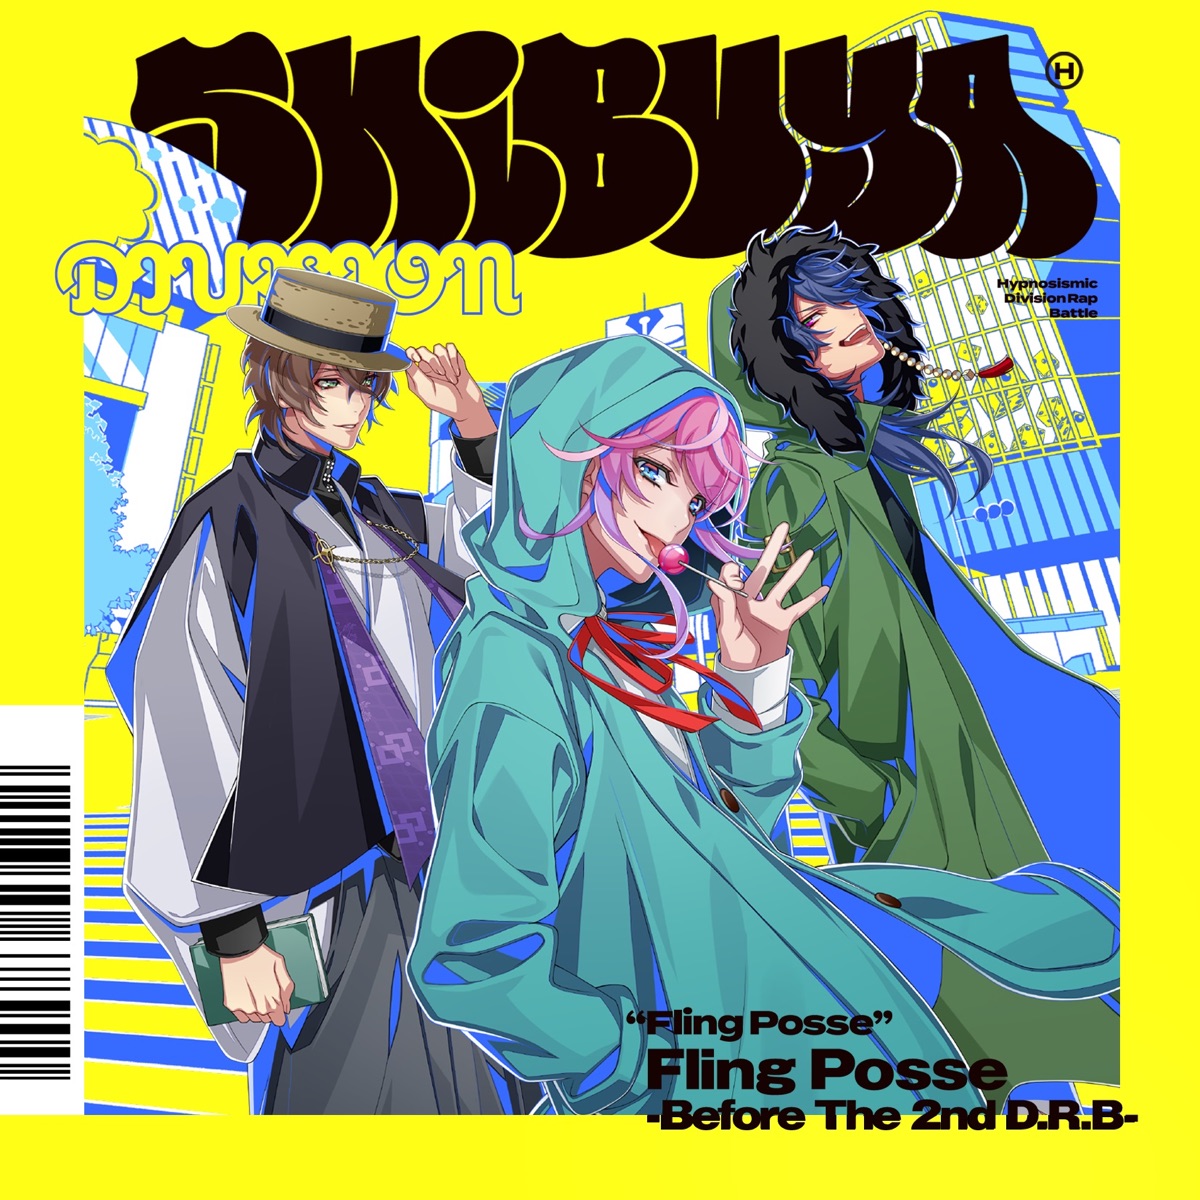 Cover art for『Gentaro Yumeno (Soma Saito) - 蕚』from the release『Fling Posse-Before The 2nd D.R.B-